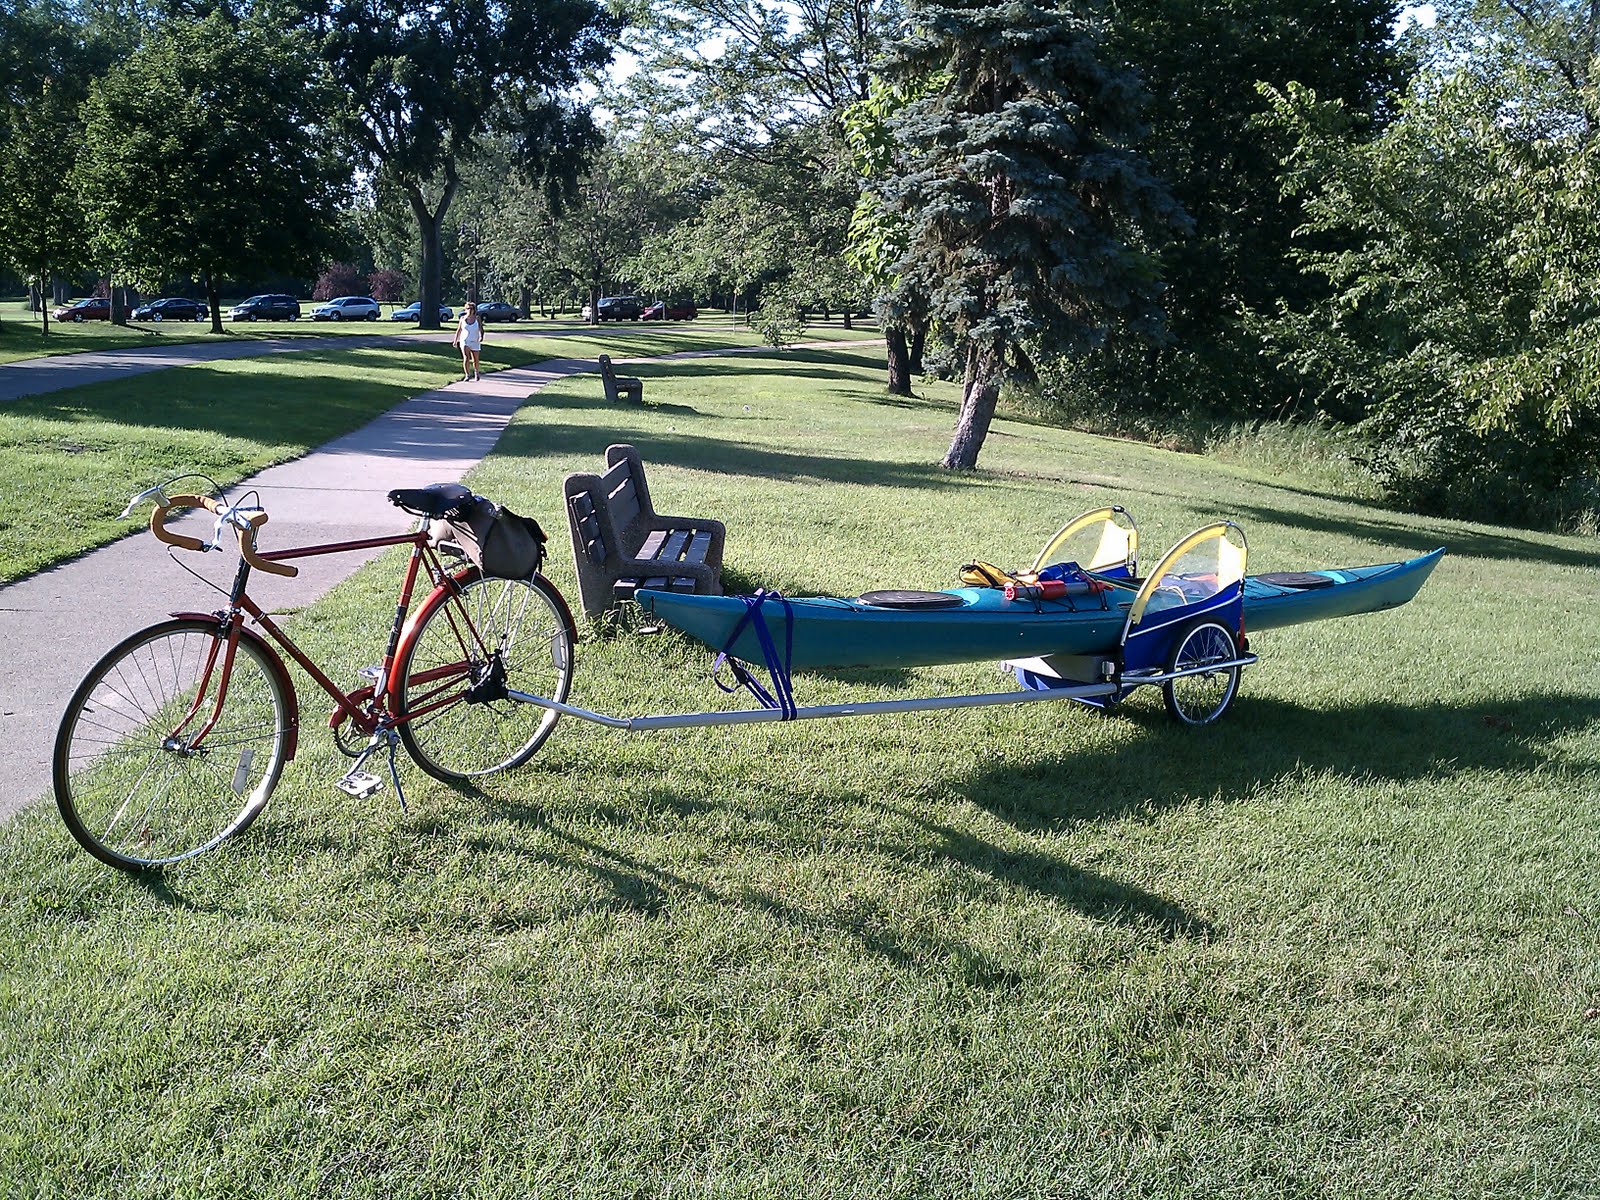  Occasional Keyboard Shortcut Trading Post: Kayak Trailer for a Bicycle